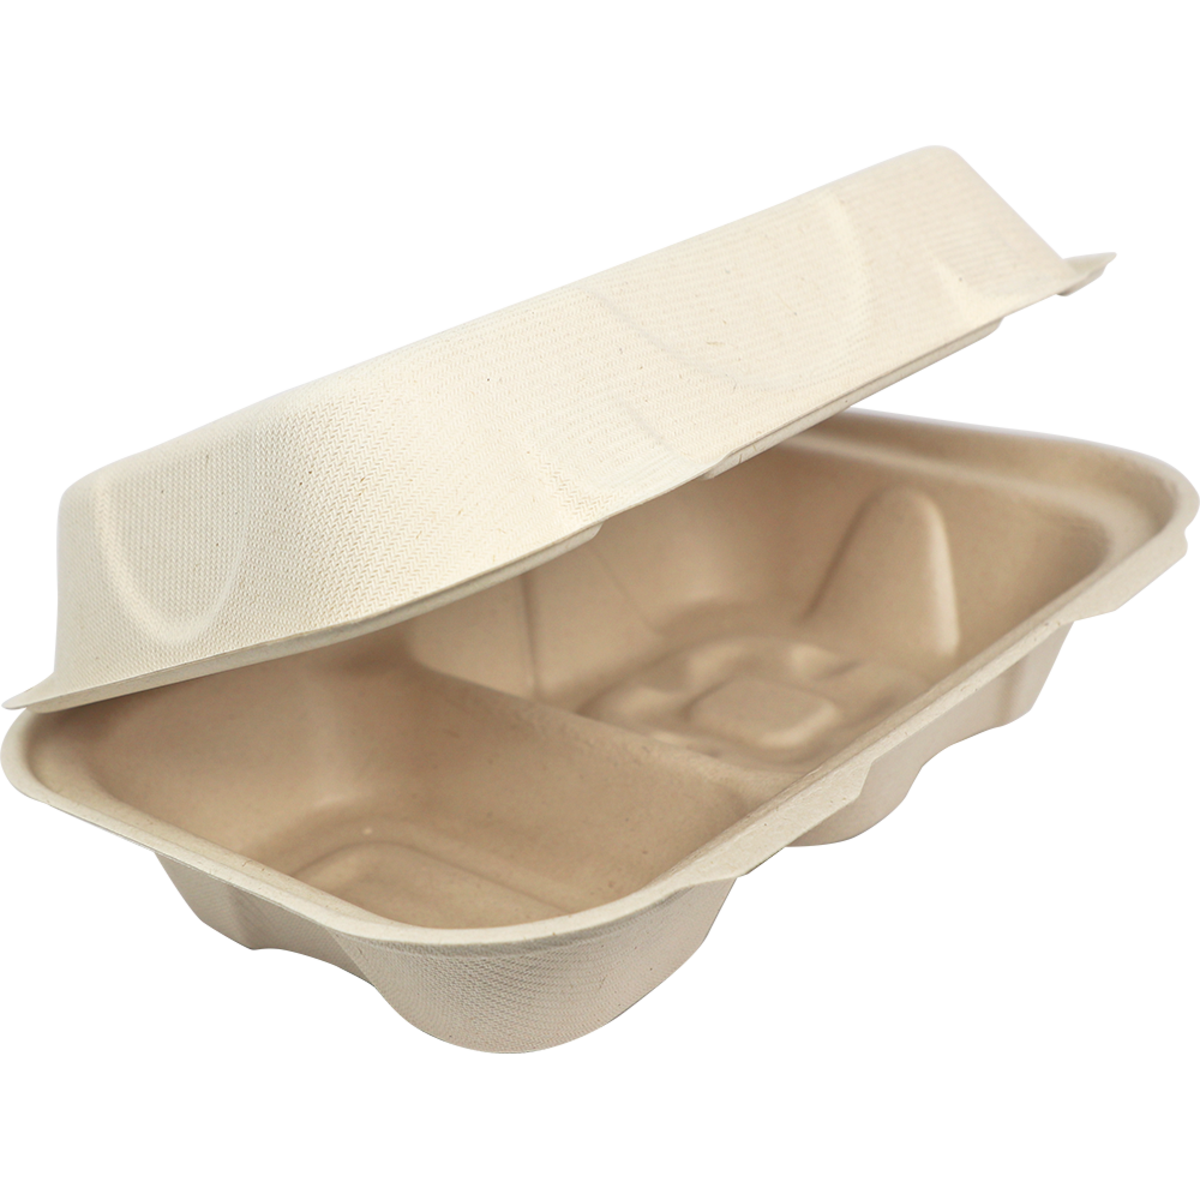 9" x 6" x 3" Clamshell Two Compartment | Natural Plant Fiber (Pack of 100)